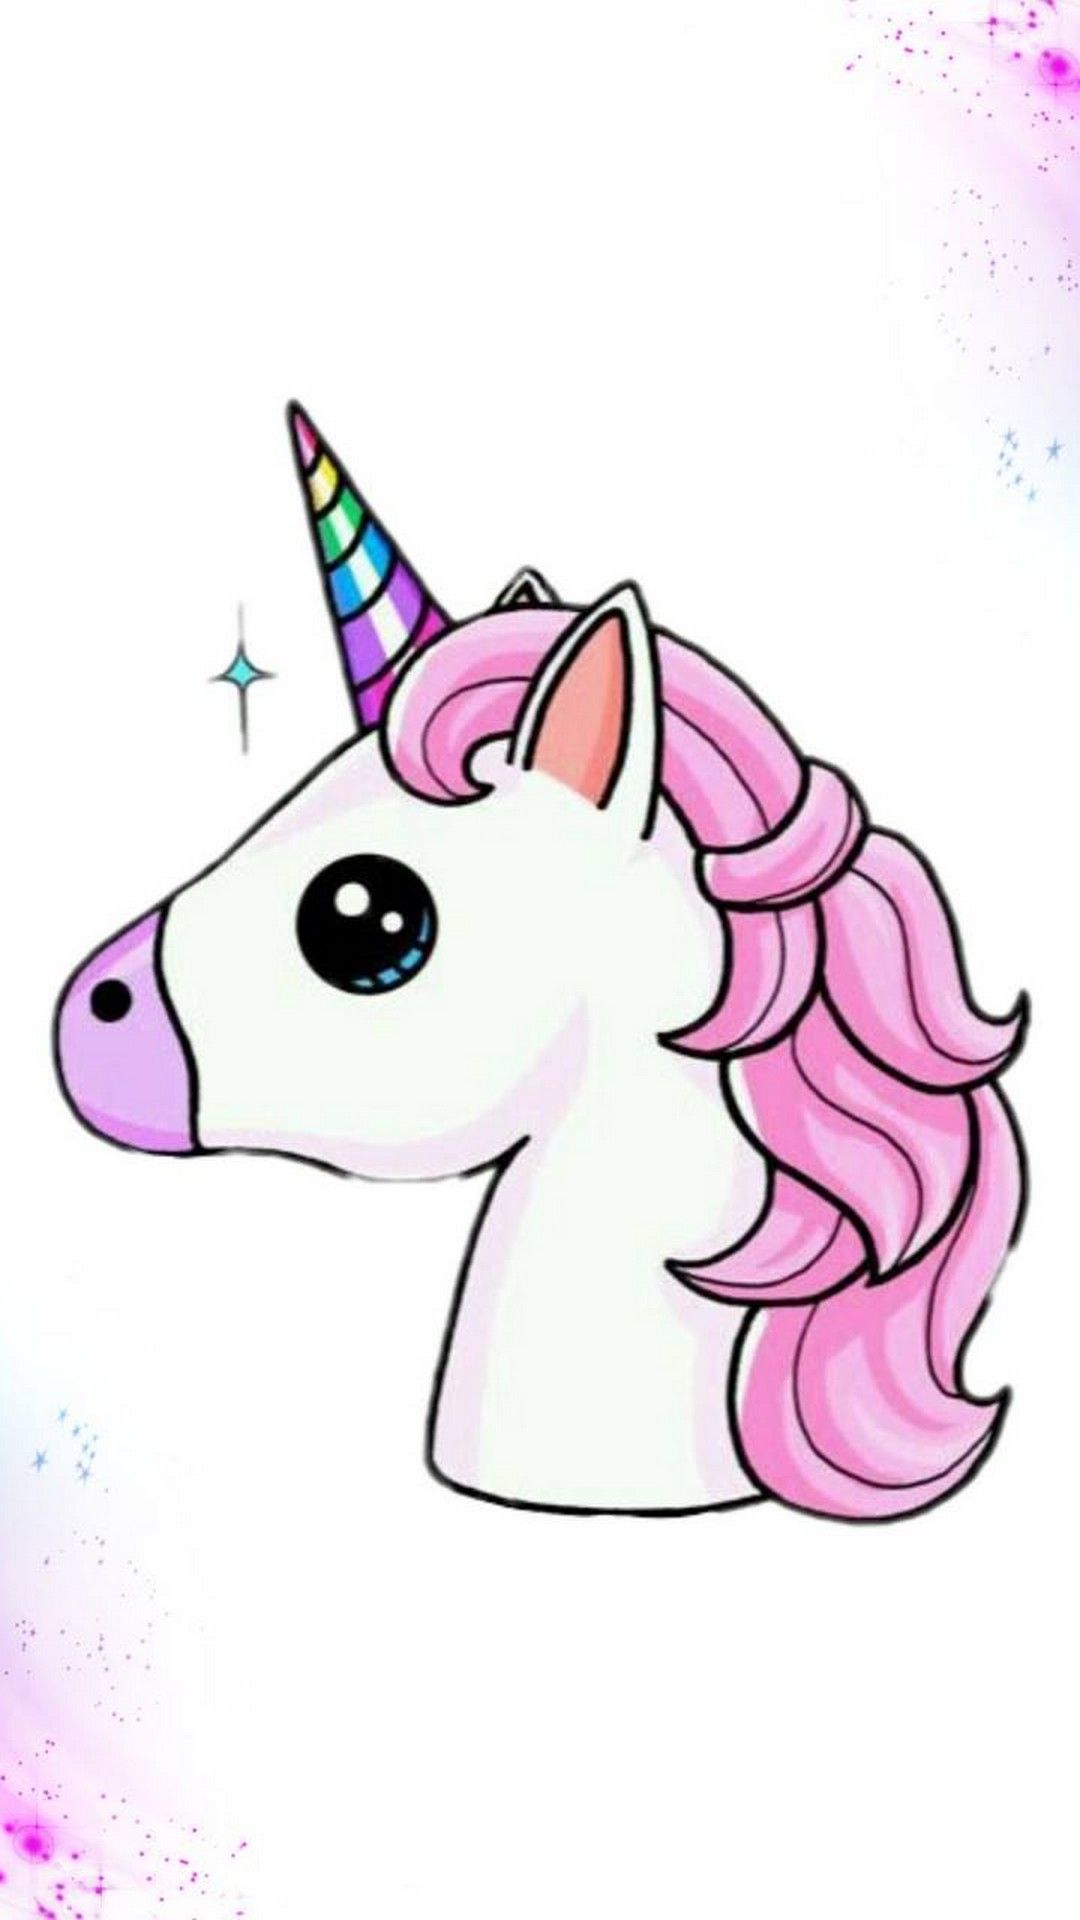 Wallpaper Android Cute Girly Unicorn Android Wallpaper